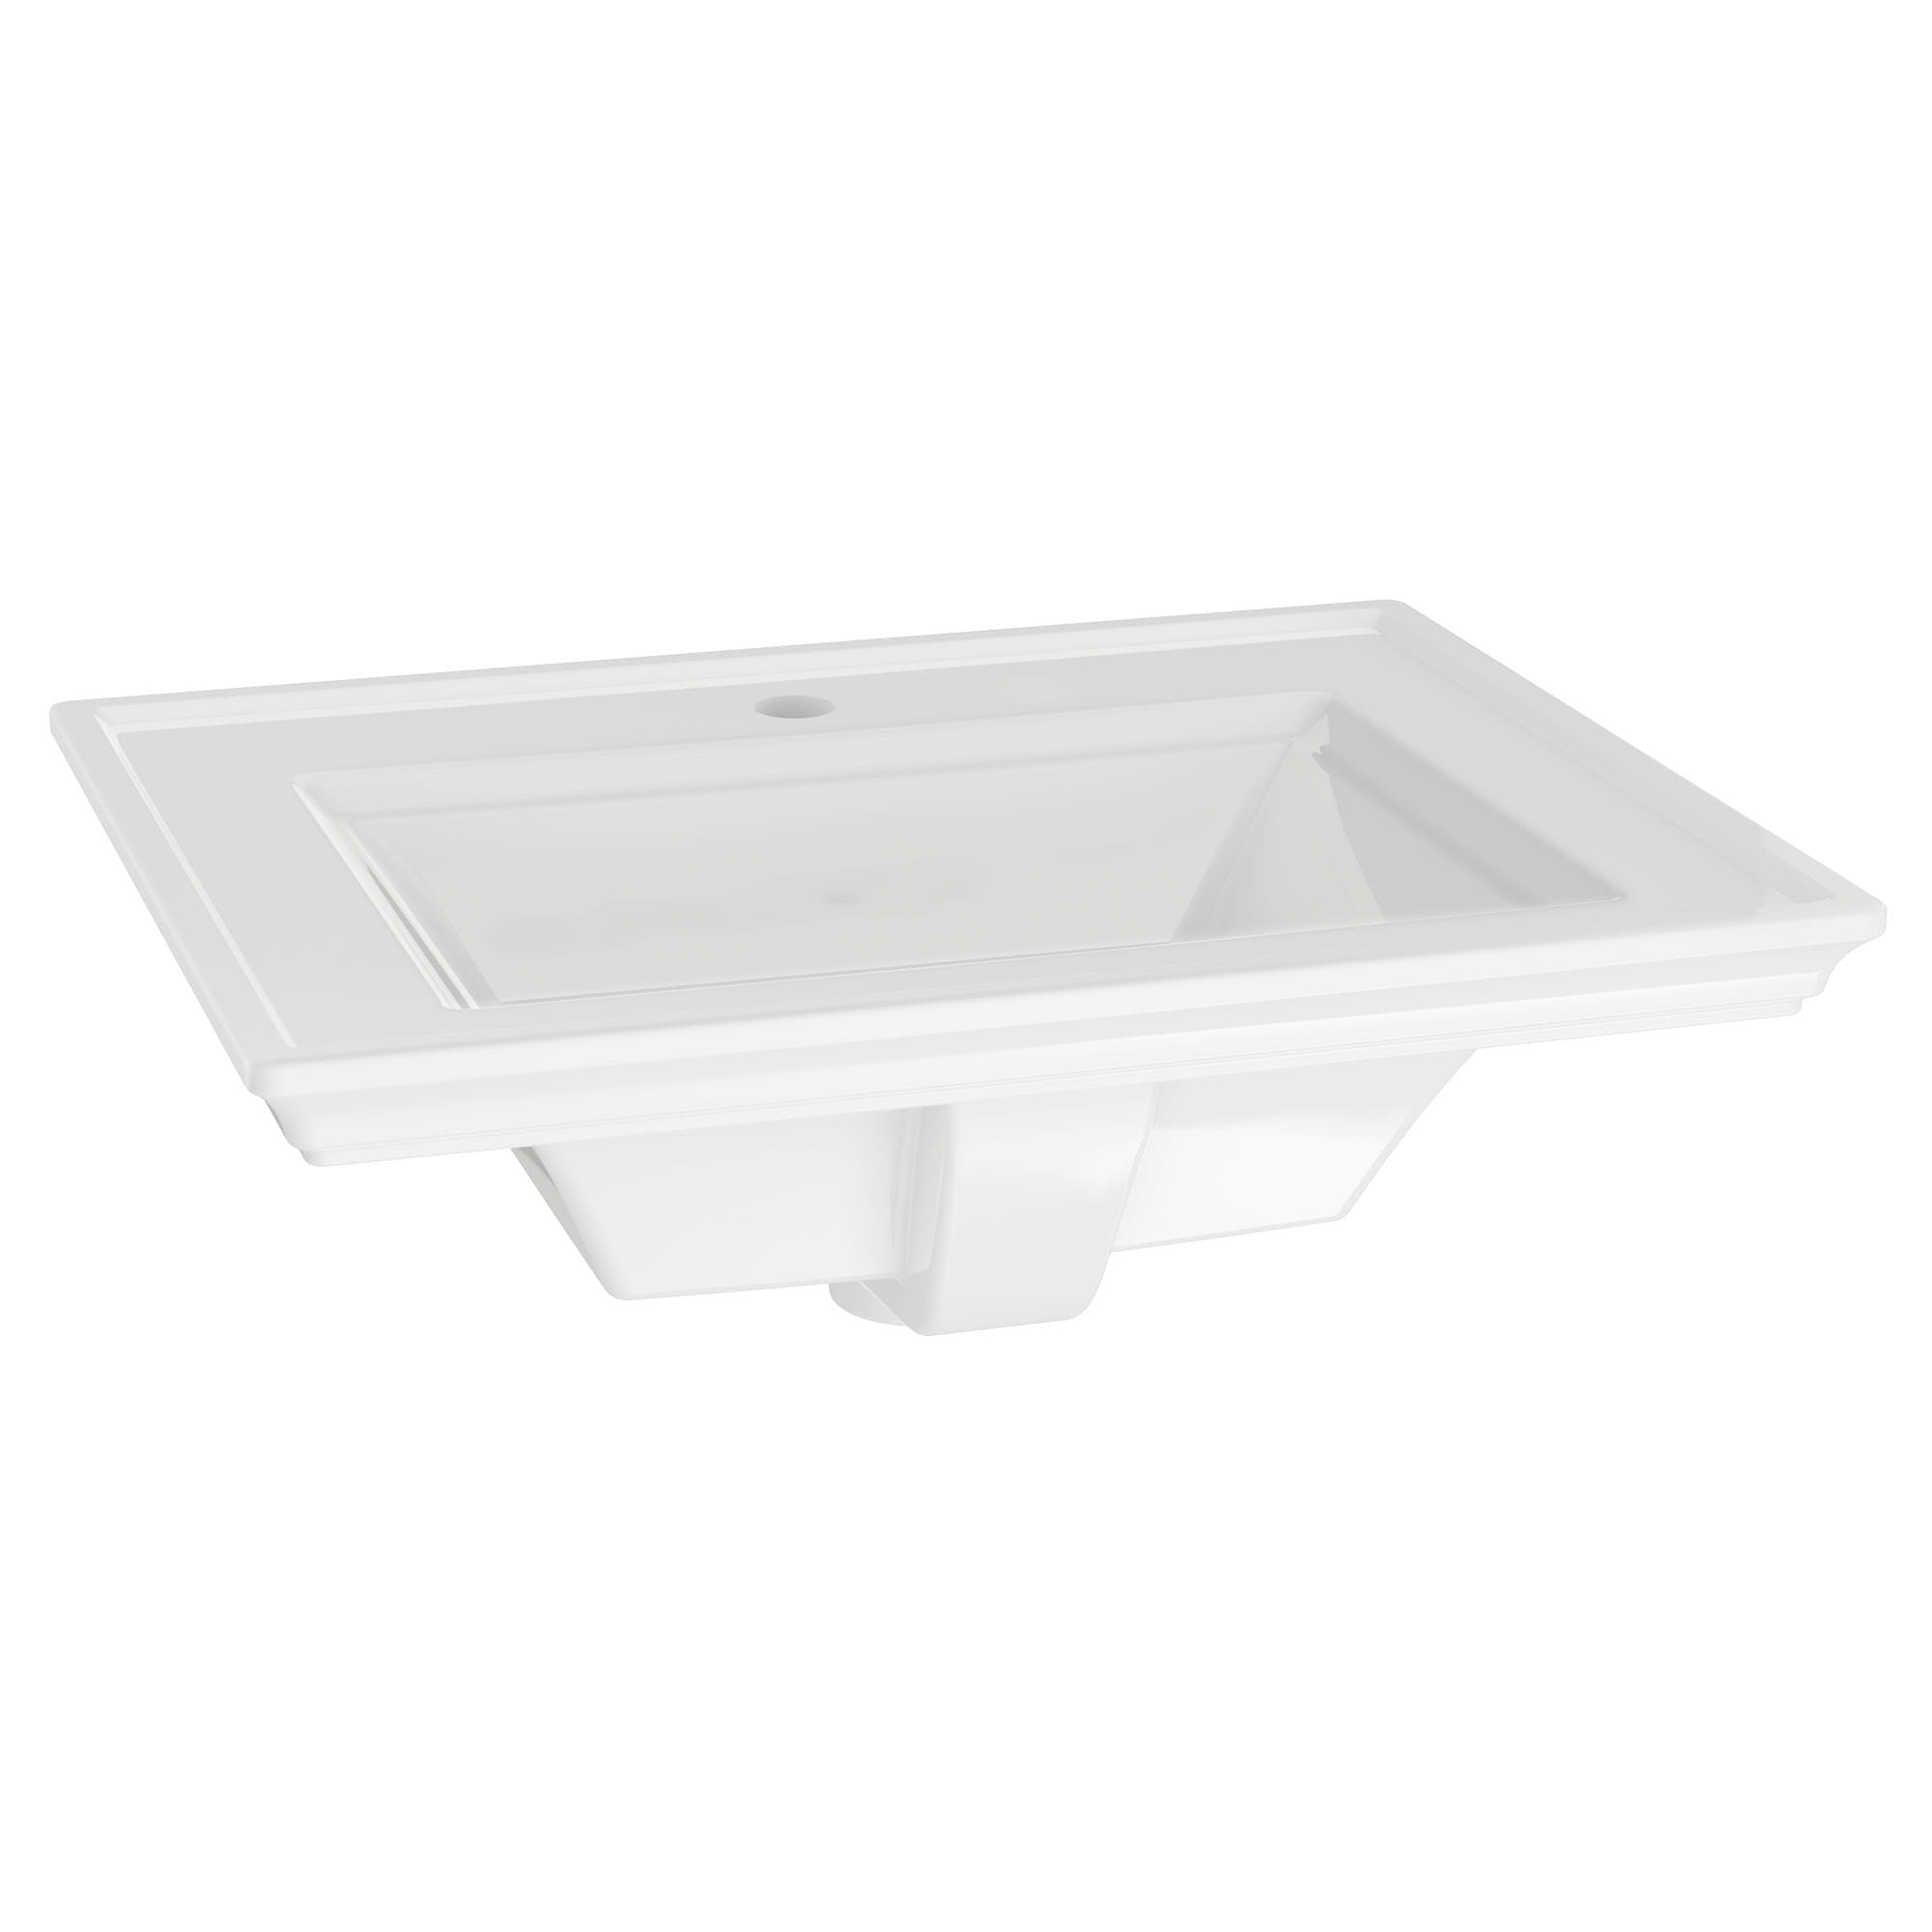 Town Square® S Drop-In Sink With Center Hole Only